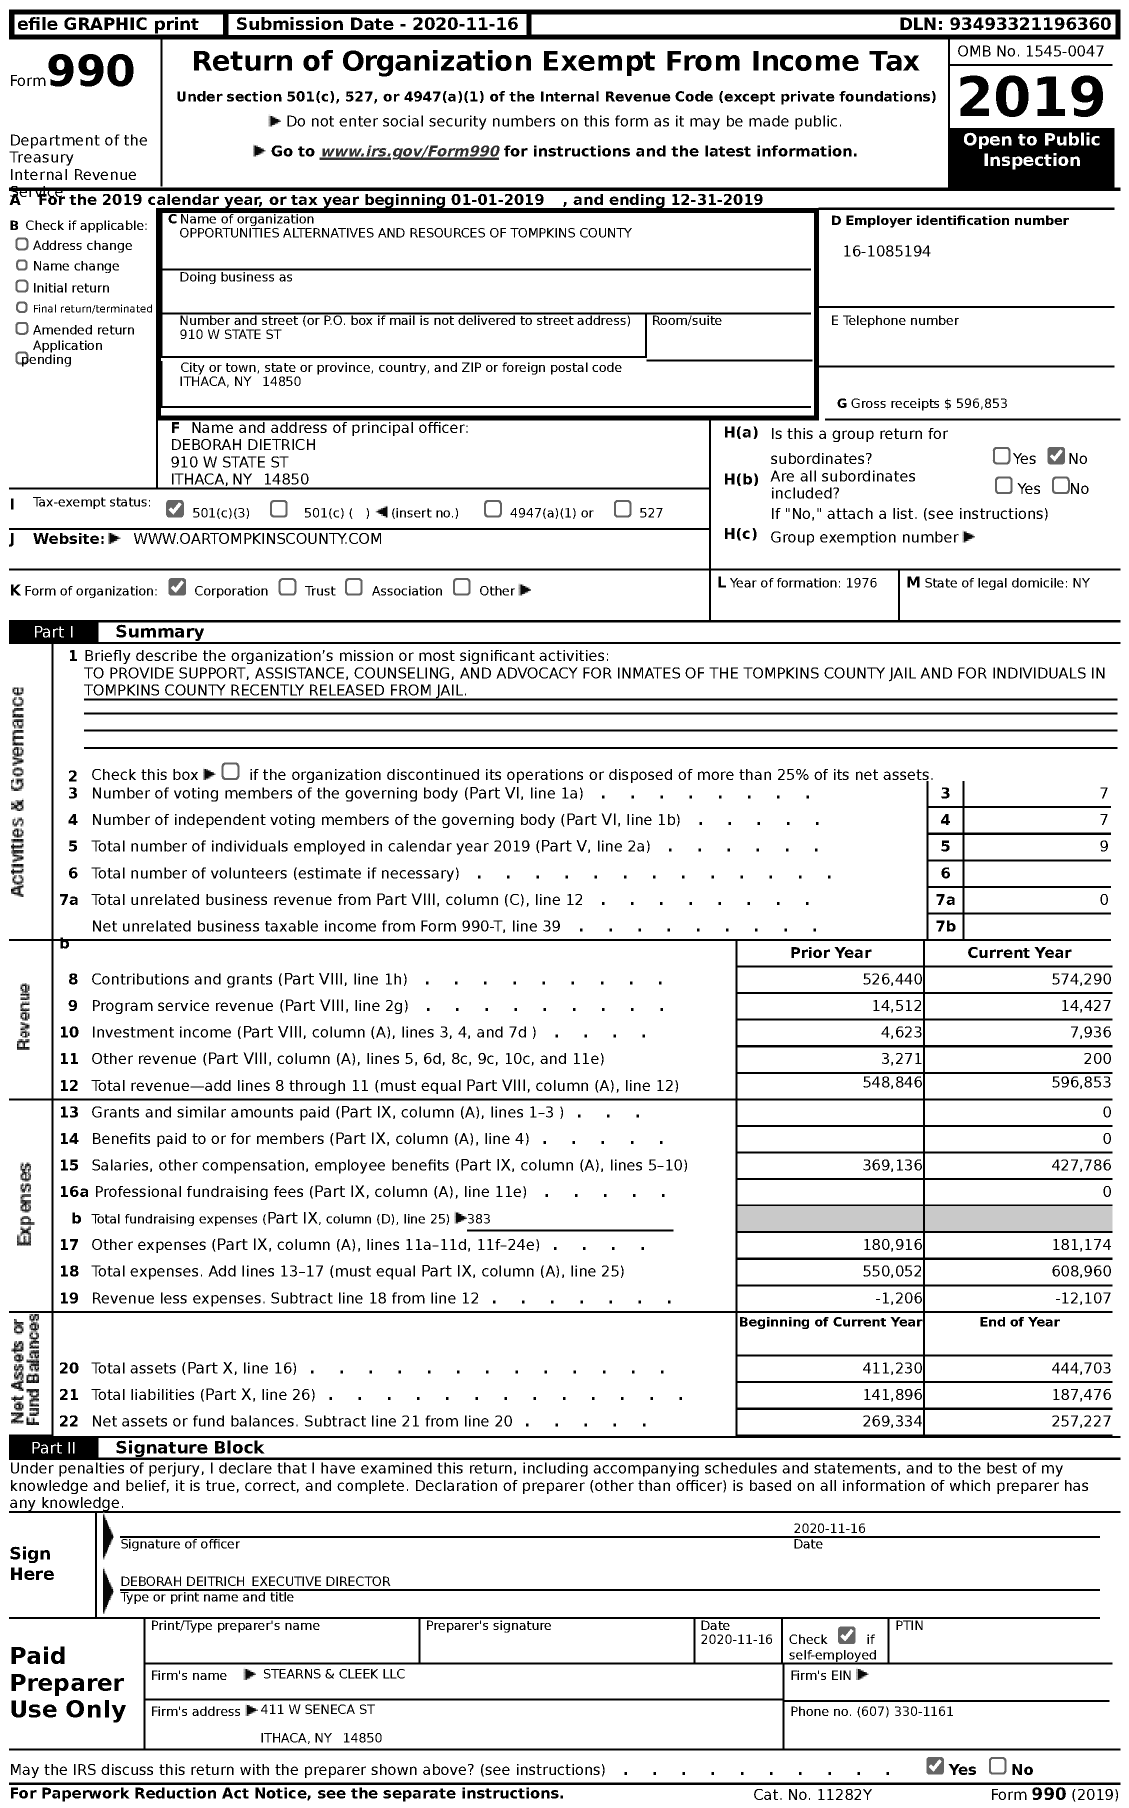 Image of first page of 2019 Form 990 for Opportunities Alternatives and Resources of Tompkins County